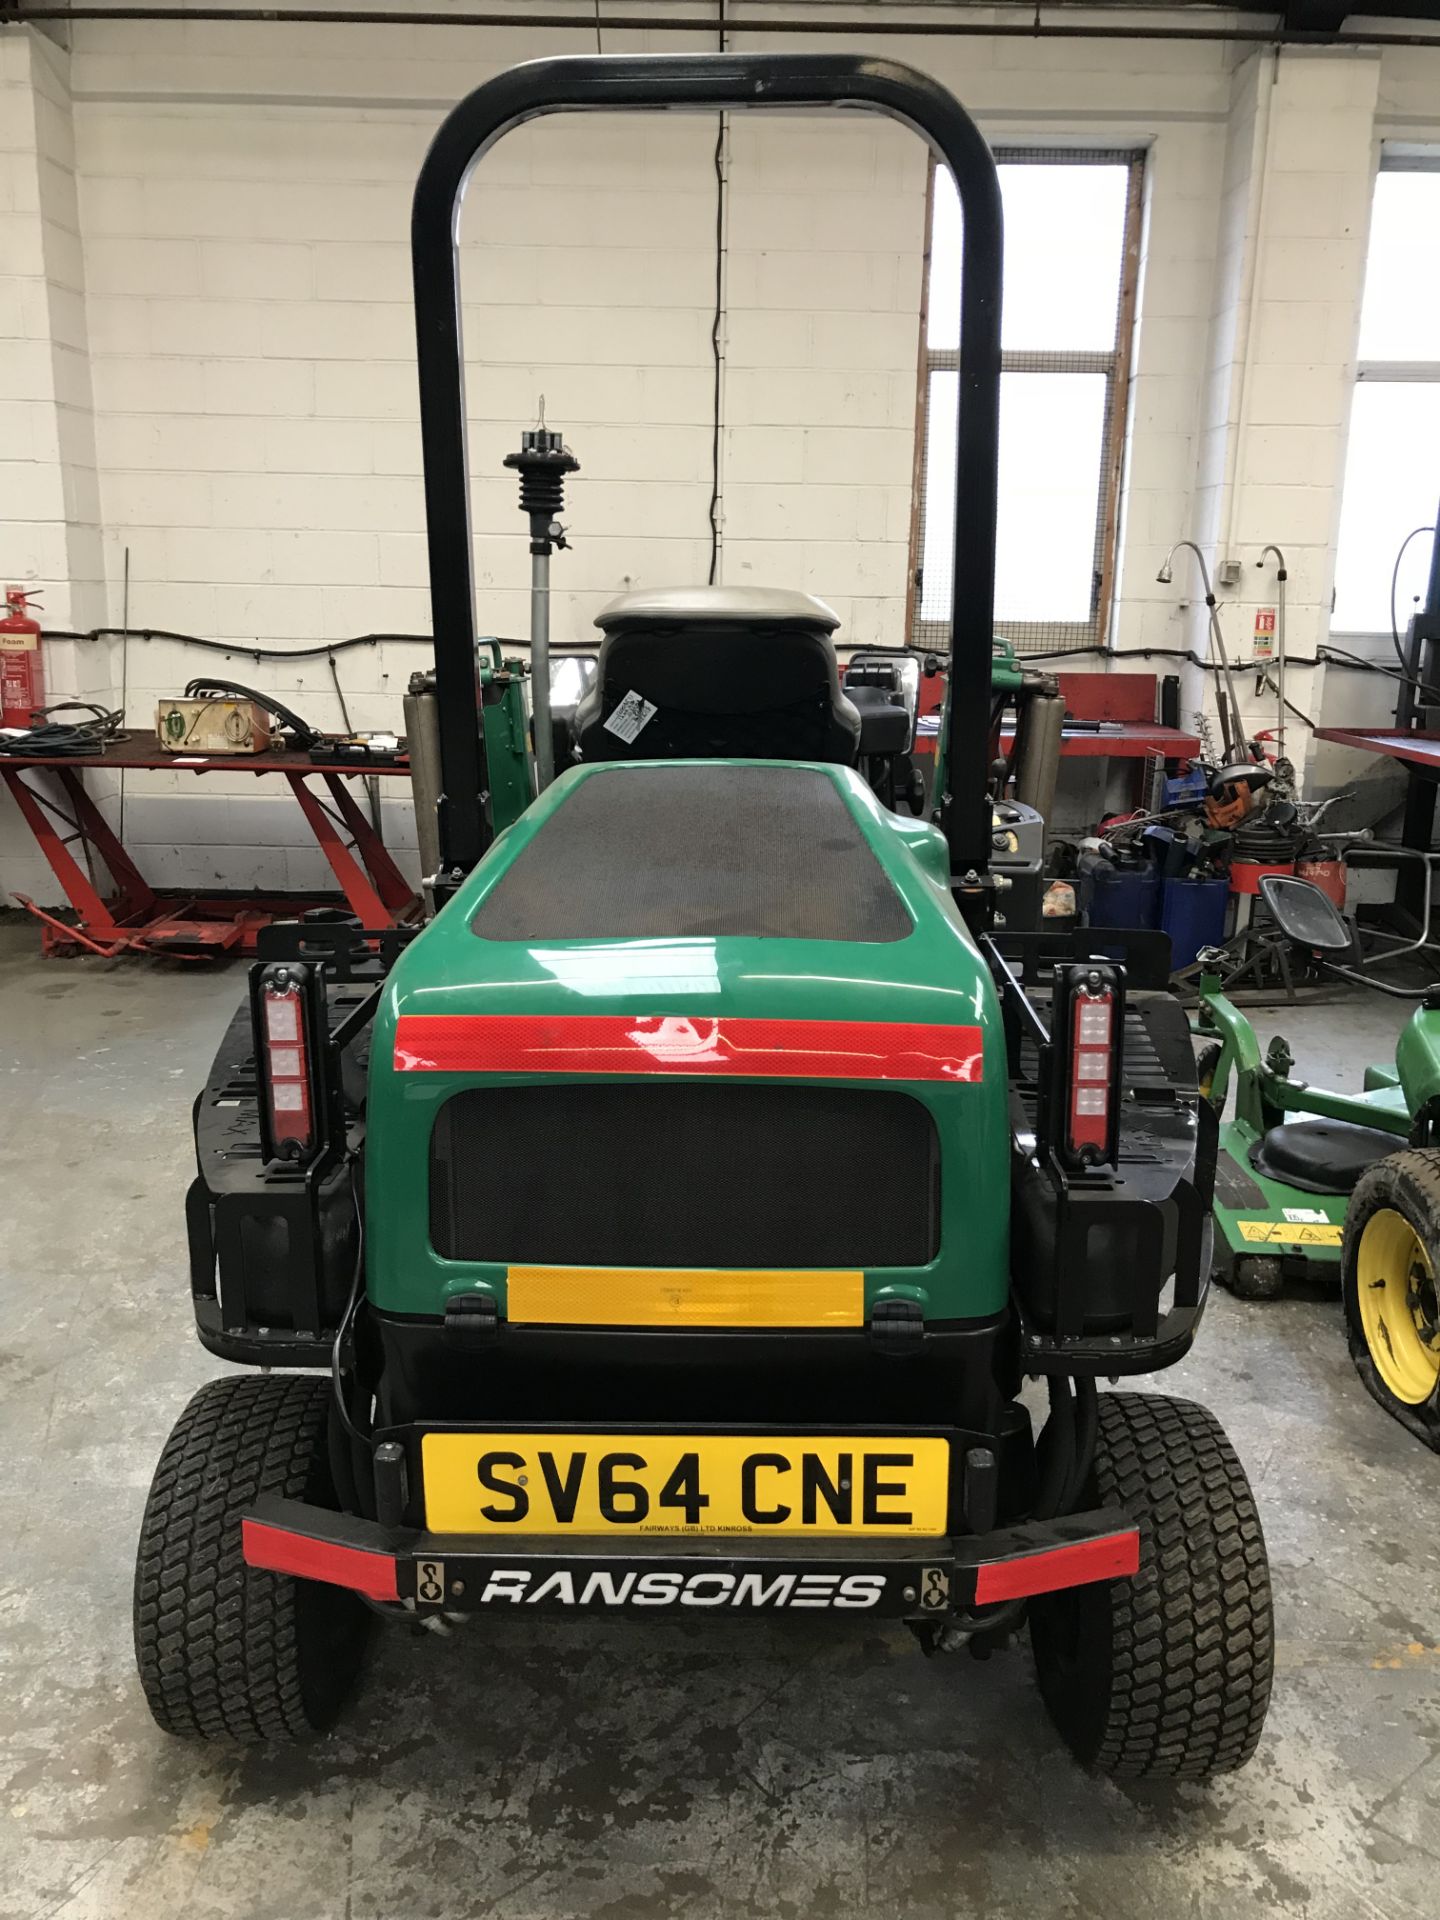 Ransomes Highway 3 4WD Cylinder Mower | 64 Plate - Image 4 of 7